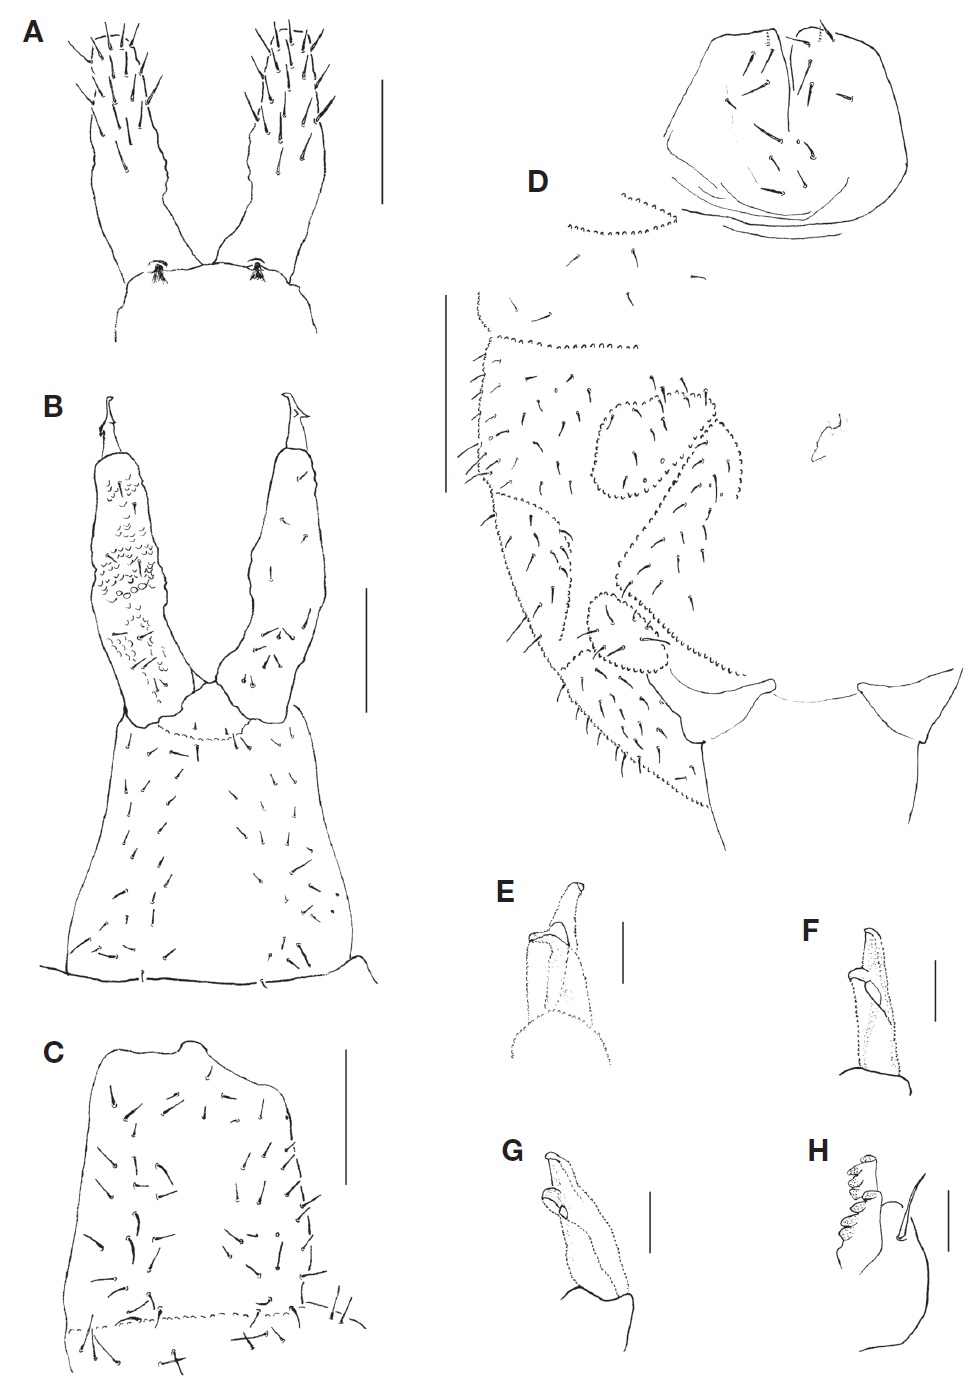 Pachyotoma takeshitai (Kinoshita, 1916). A, Dens, anterior side; B, Dens and manubrium, posterior side; C, Manubrium in another specimen; D, Ventral chaetotaxy of abdomen; E, Mucro (posterior view); F, Mucro of another specimen (posterior view); G, Other mucro of specimen in Fig. 3F (posterolateral view); H, Retinaculum. Scale bars: A-C=0.05 mm, D=0.1 mm, E-H=0.01 mm.